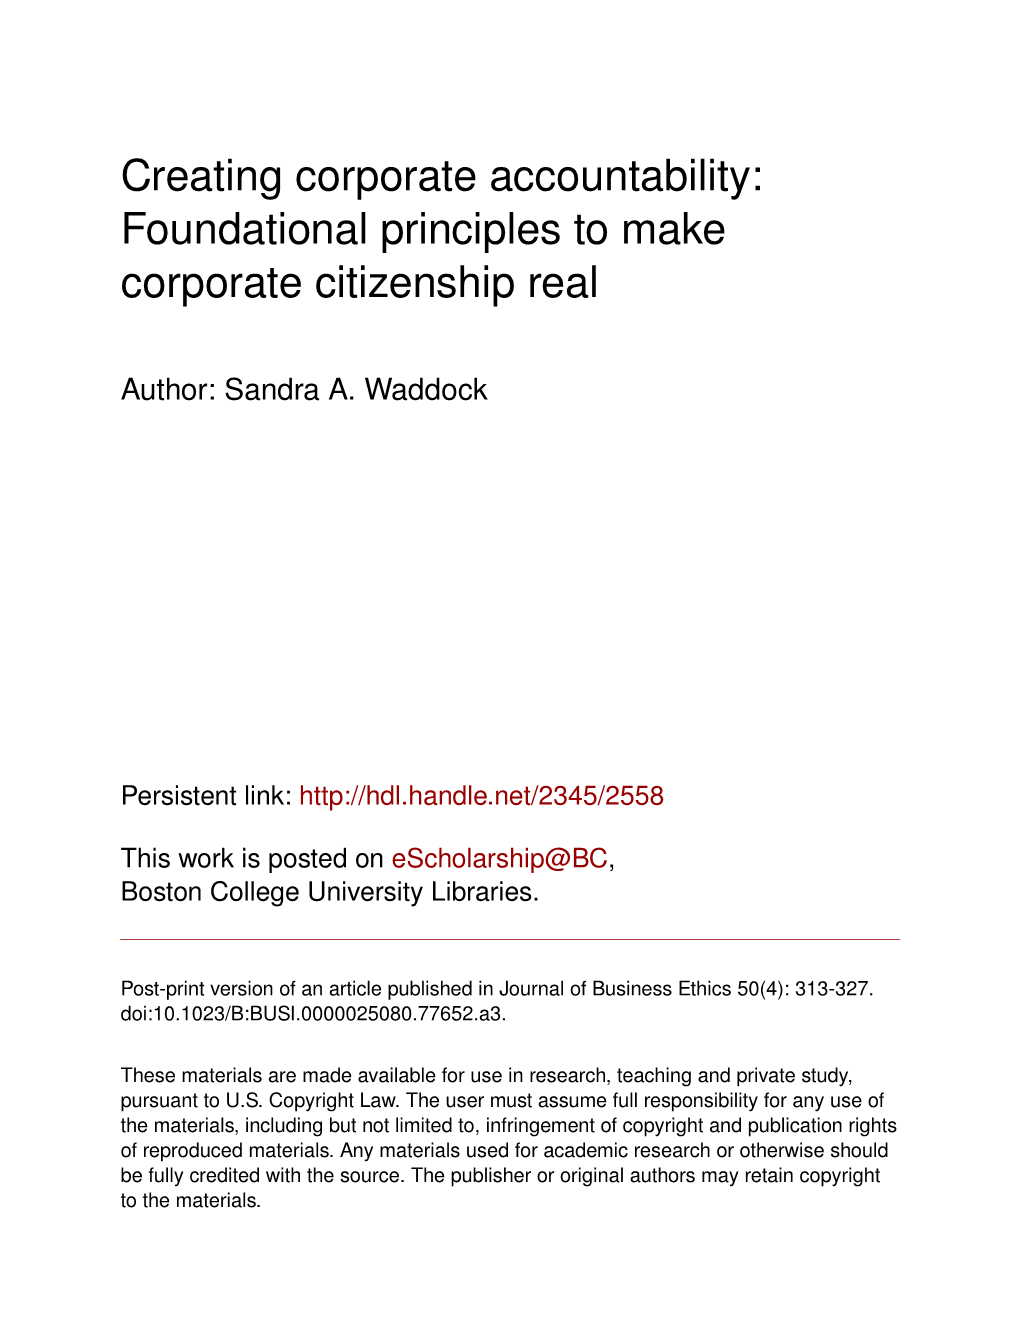 Creating Corporate Accountability: Foundational Principles to Make Corporate Citizenship Real